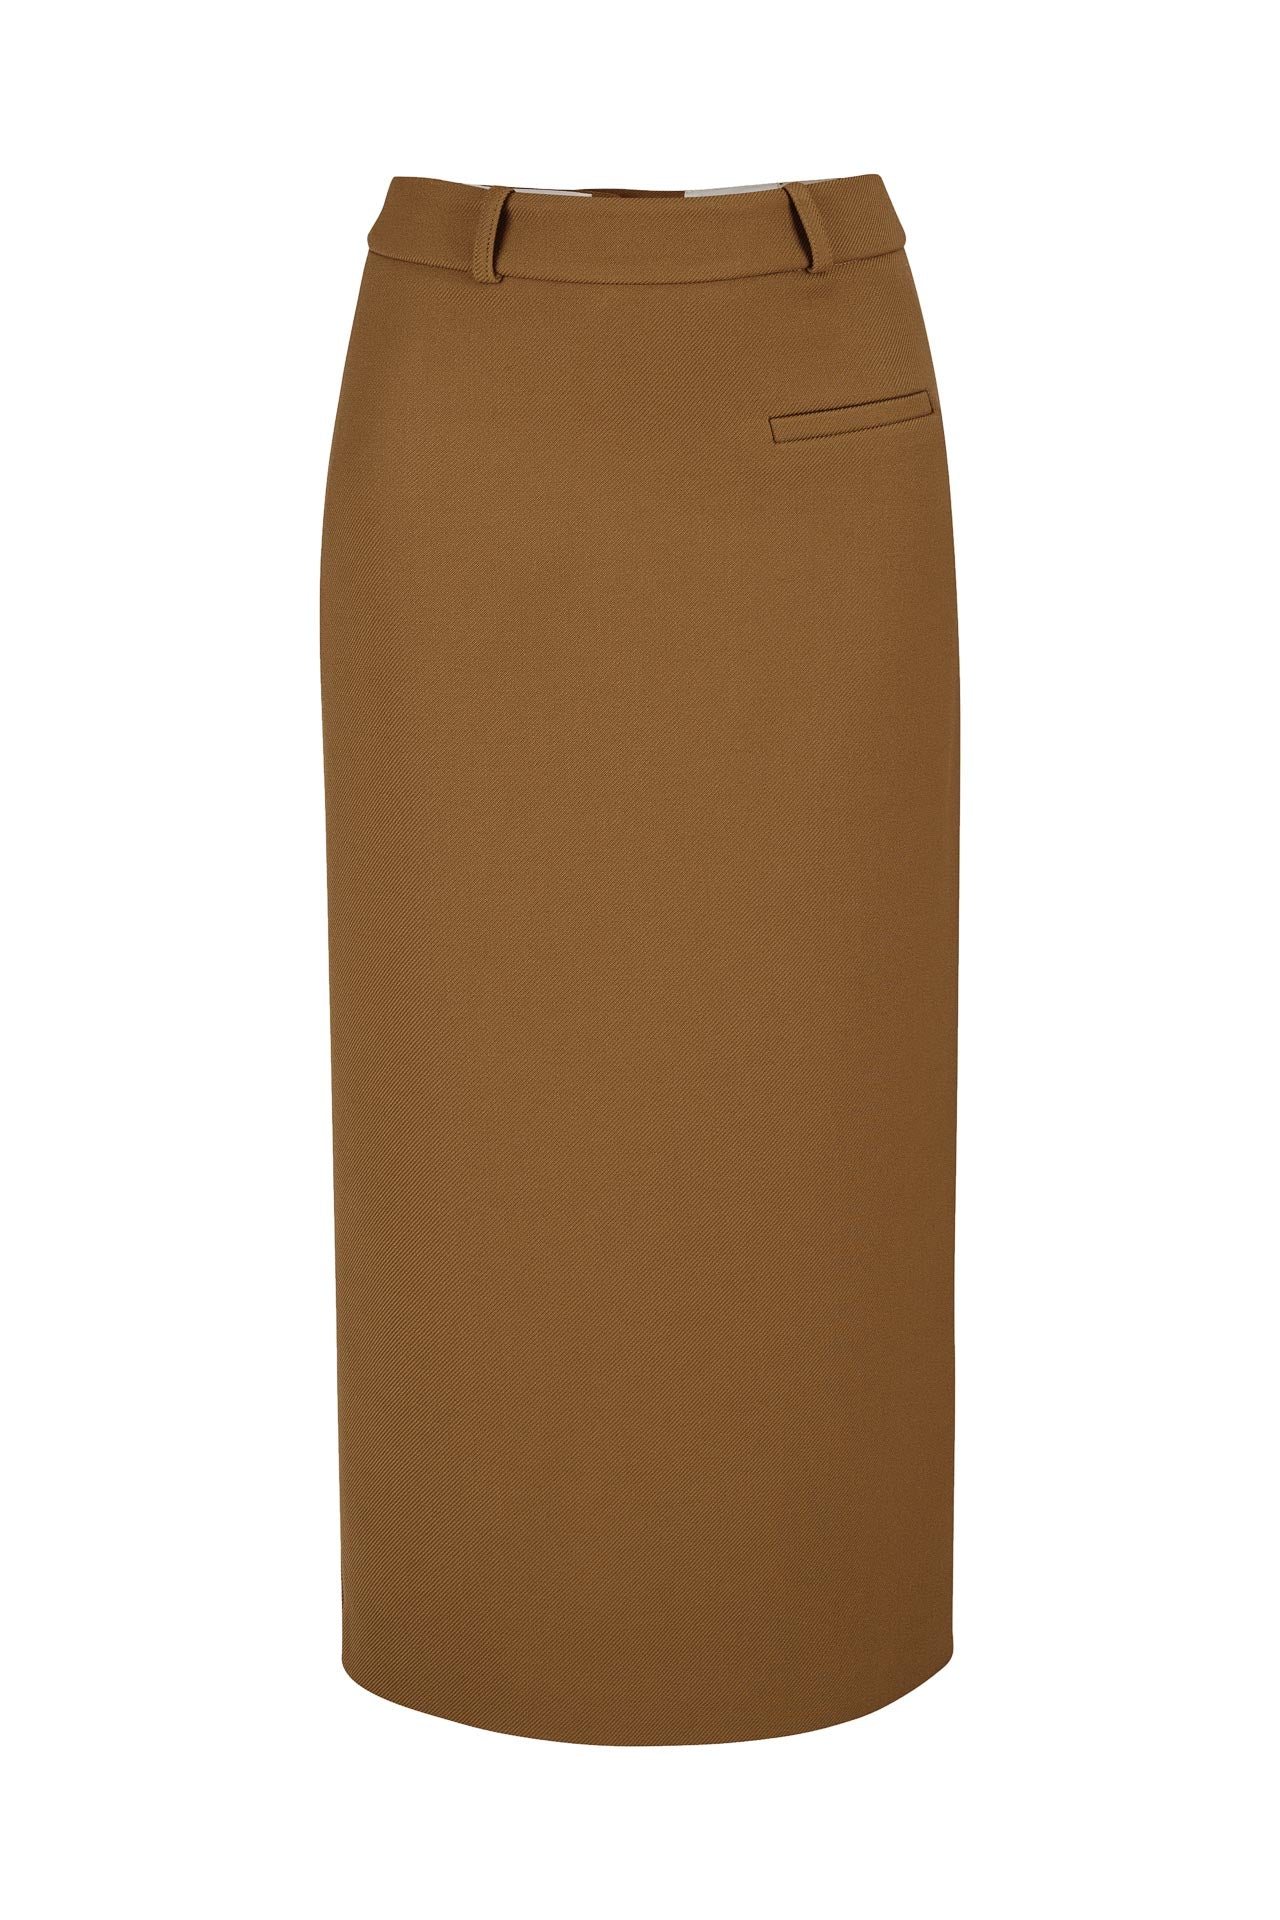 SUIT SKIRT IN CAMEL